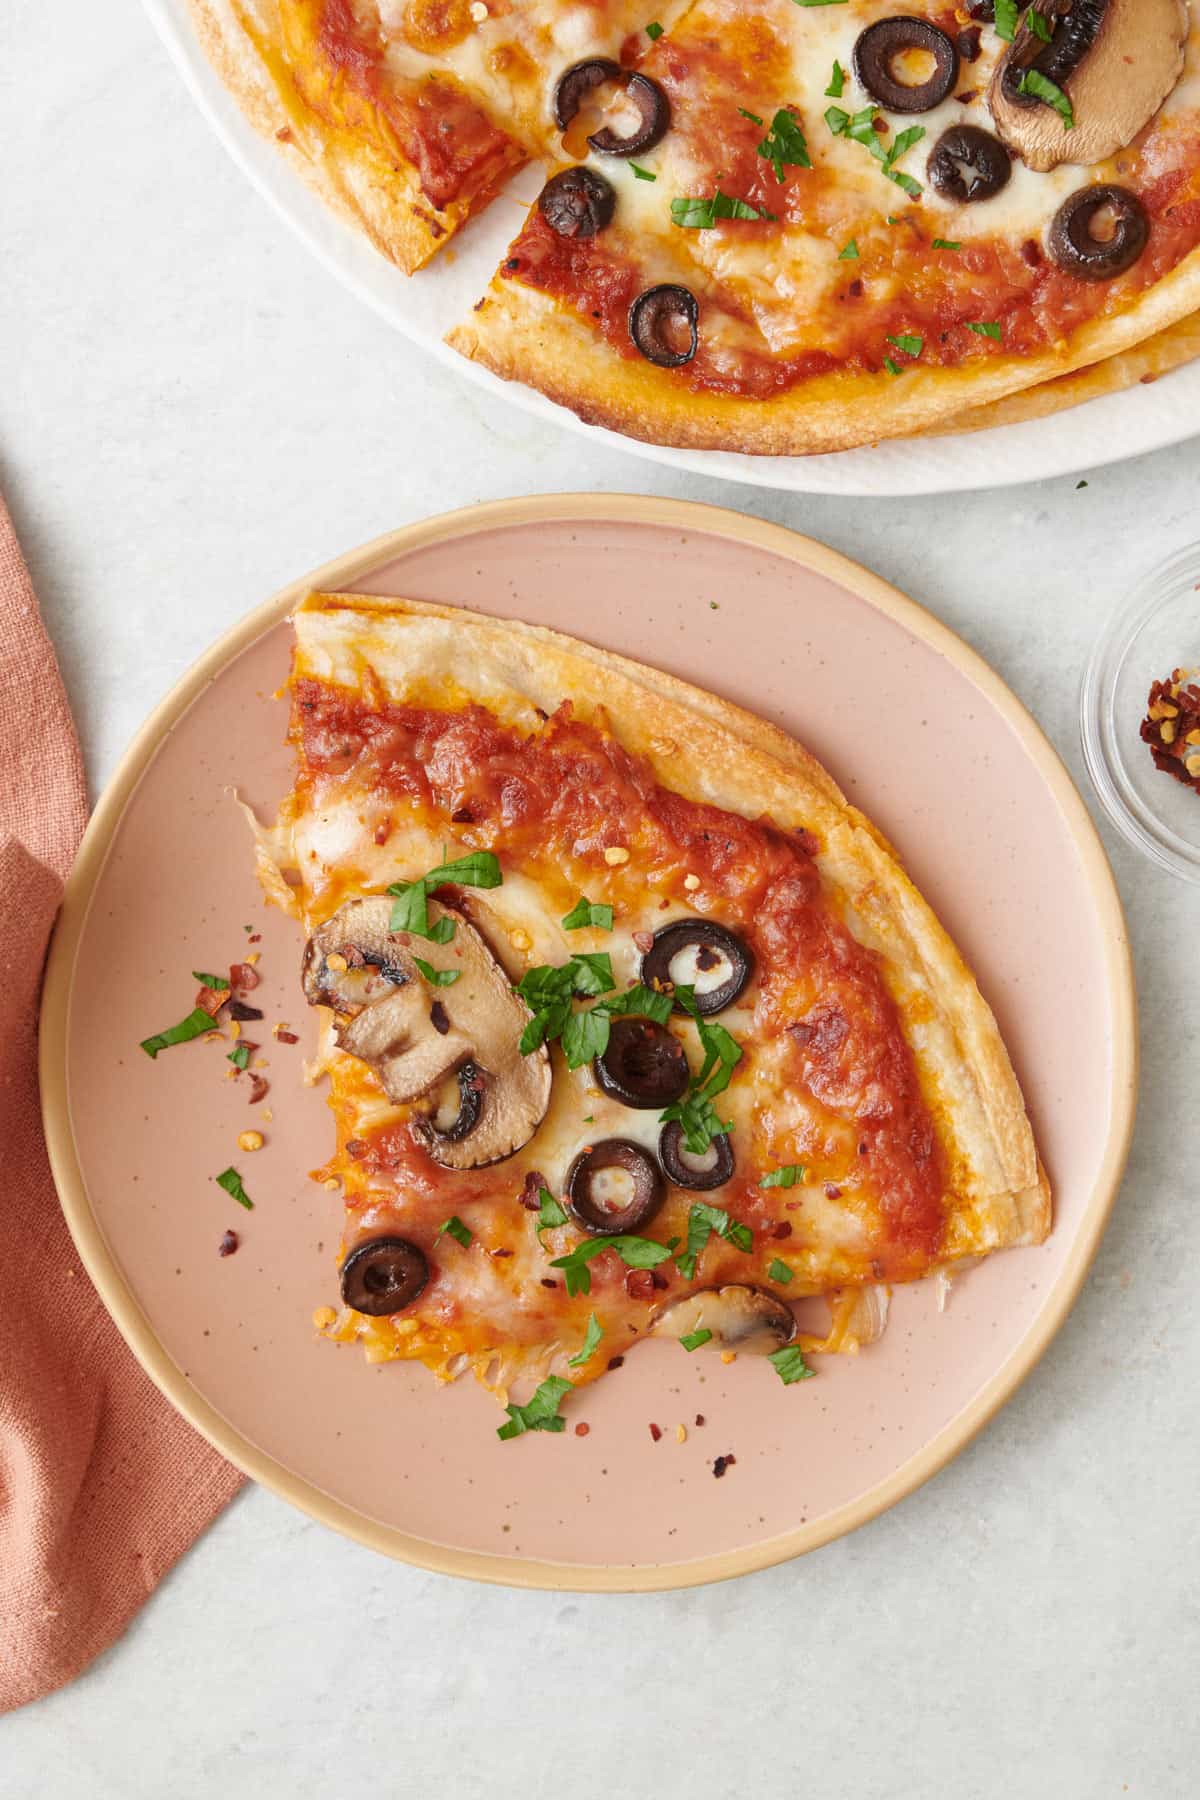 Vegetarian tortilla pizza sliced into four slices